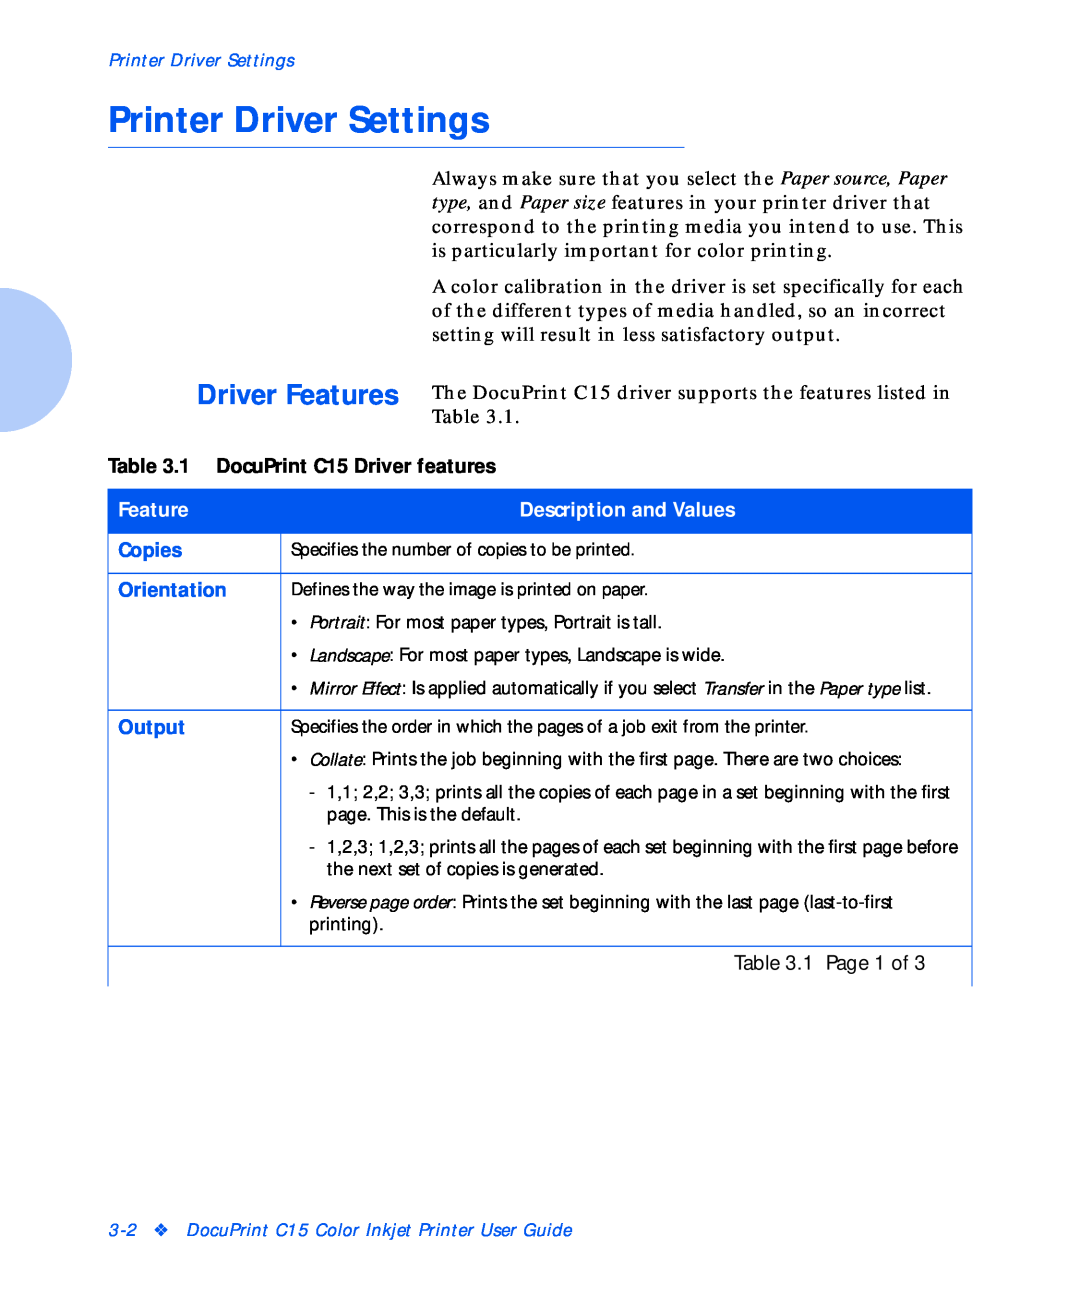 Xerox Printer Driver Settings, Driver Features, 1 DocuPrint C15 Driver features, Description and Values, Copies, Output 